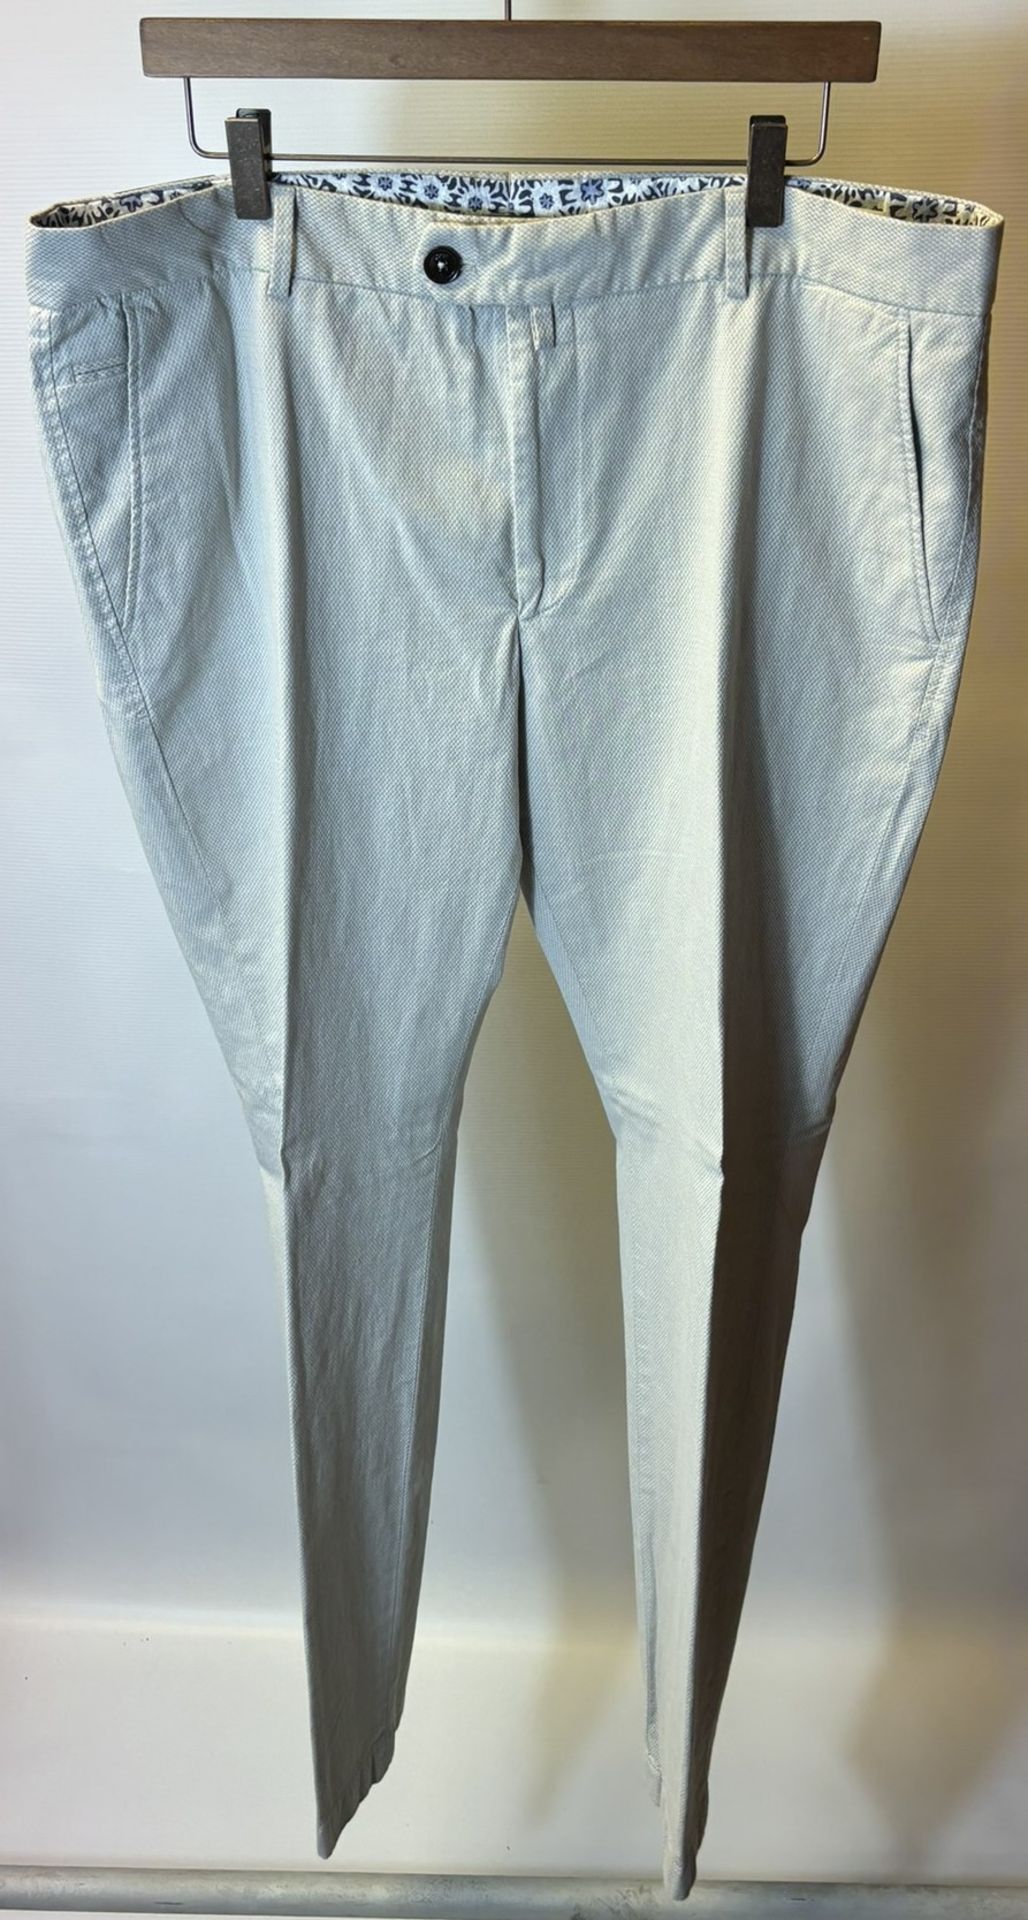 15 x Various Pairs Of Women's Trousers As Seen In Photos - Image 19 of 45